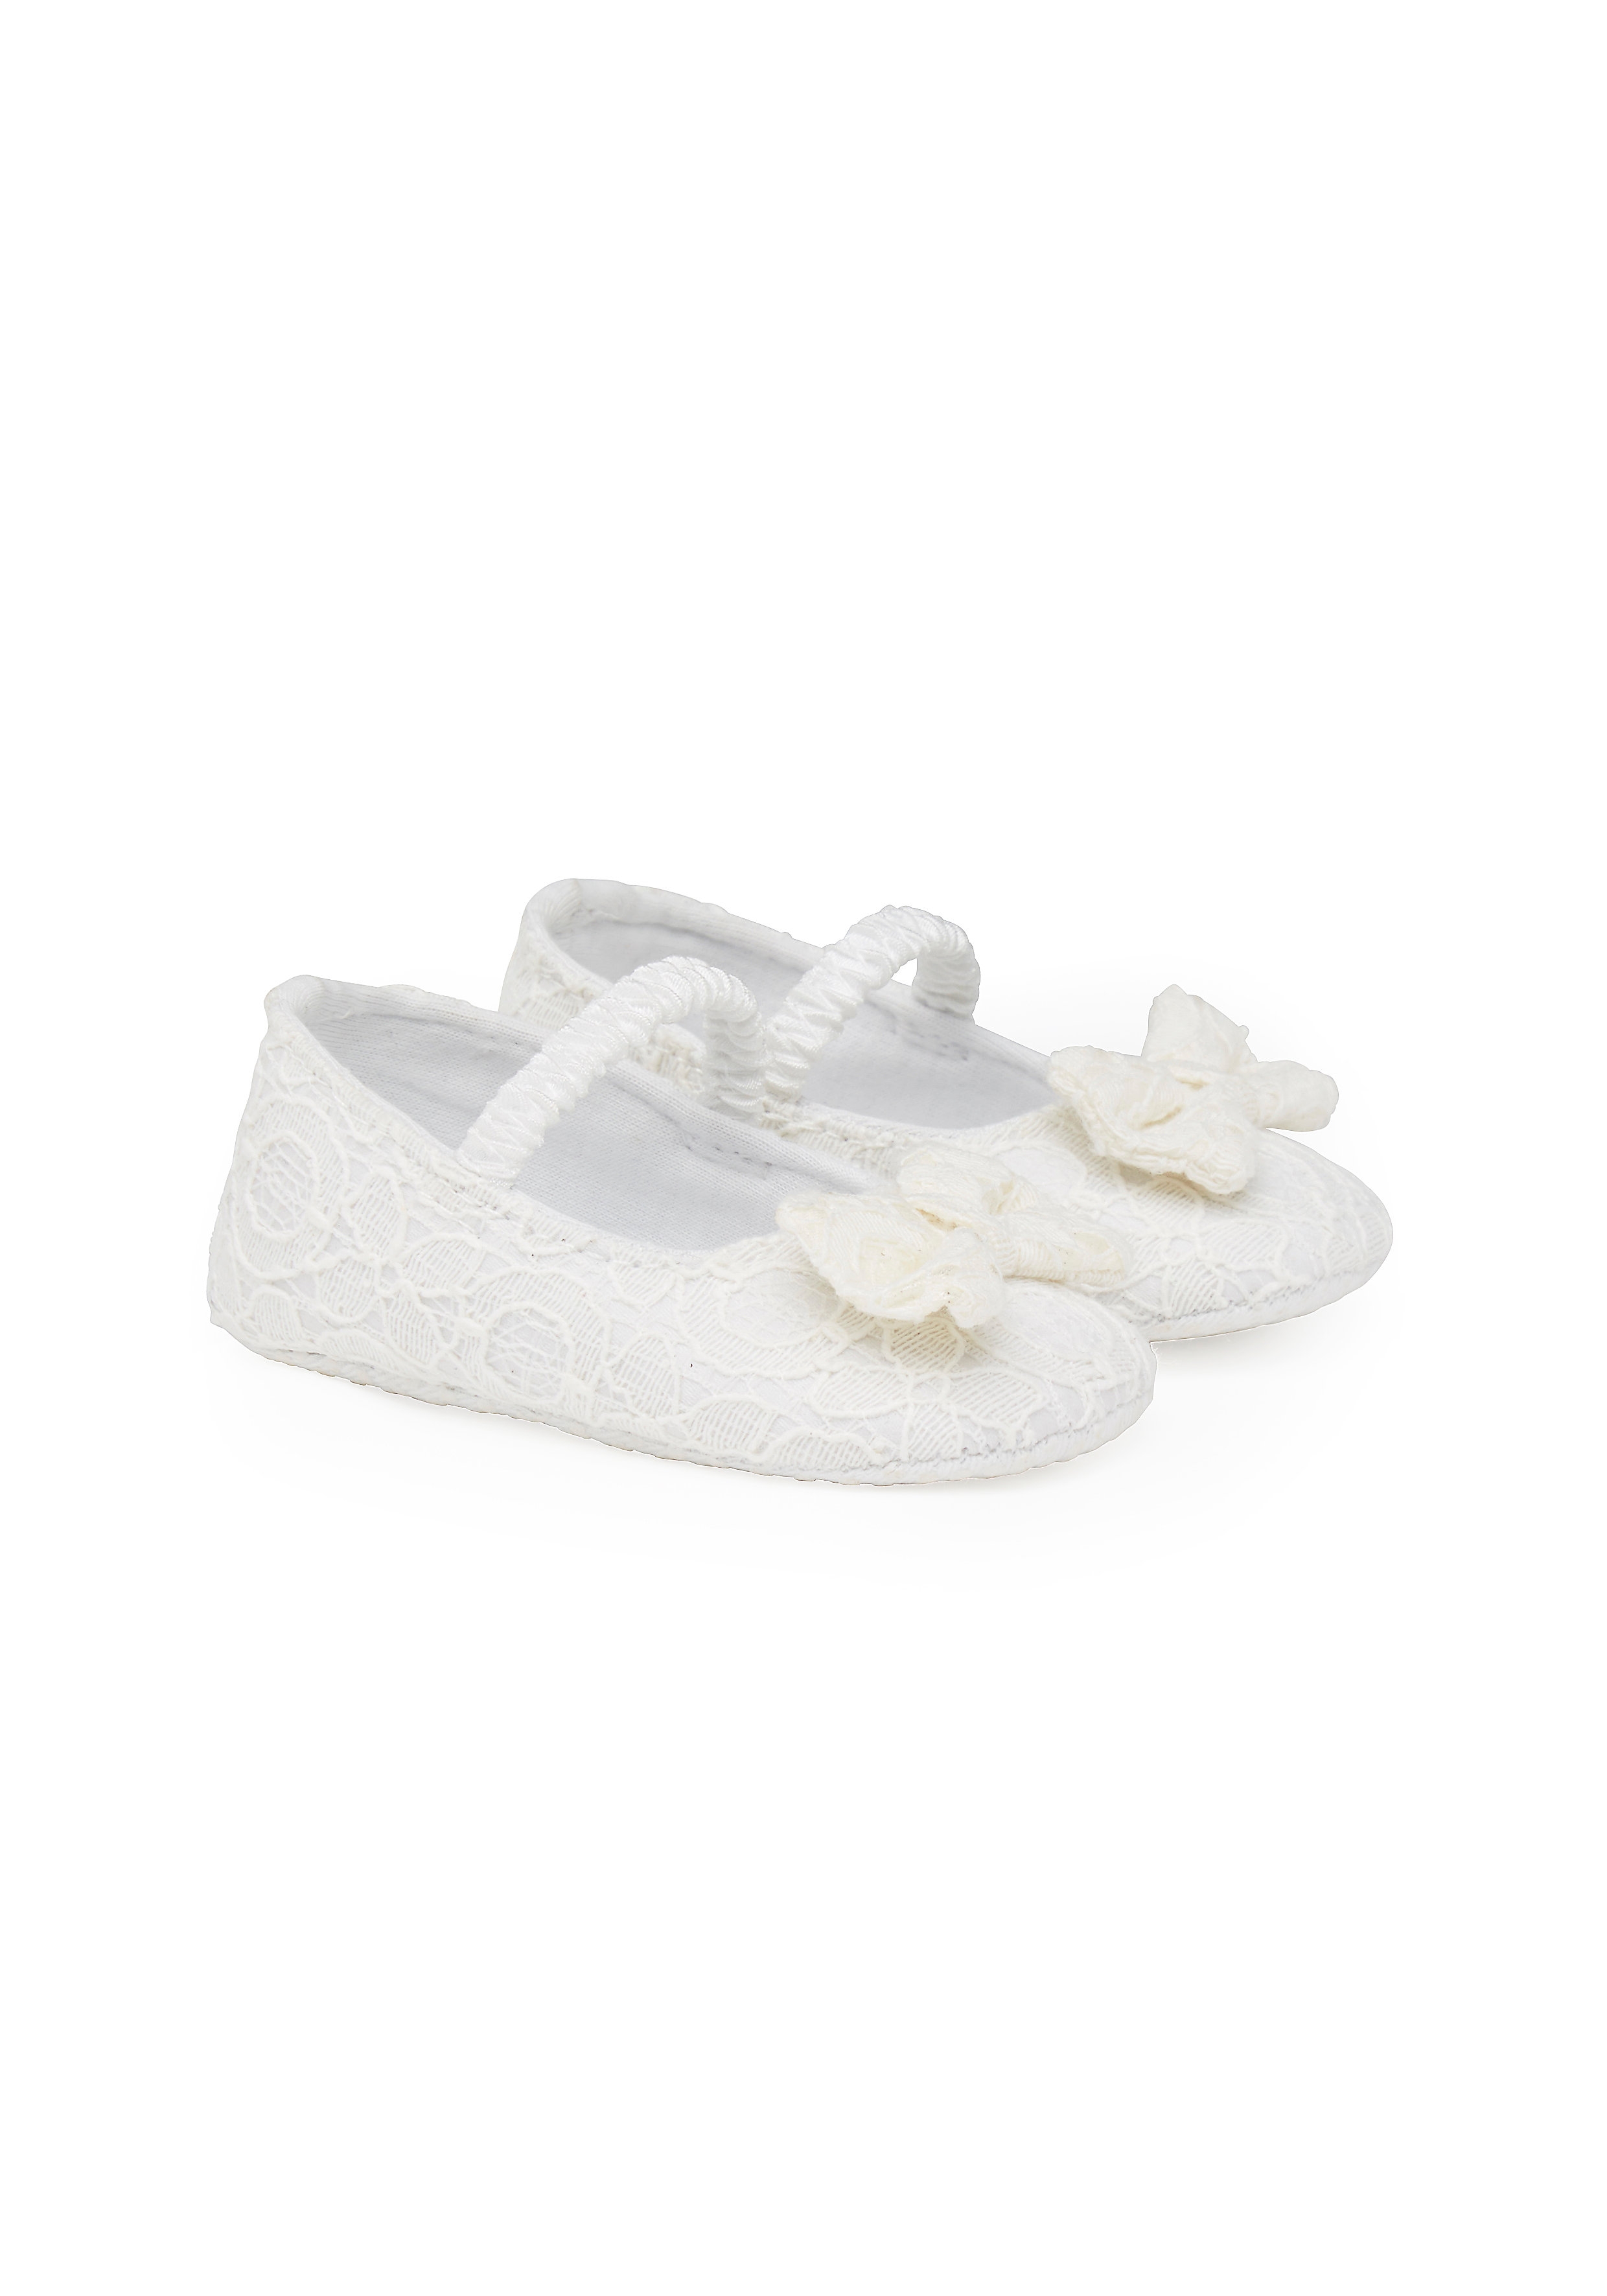 Mothercare | Girls Lace Occasion Shoes - Cream 0